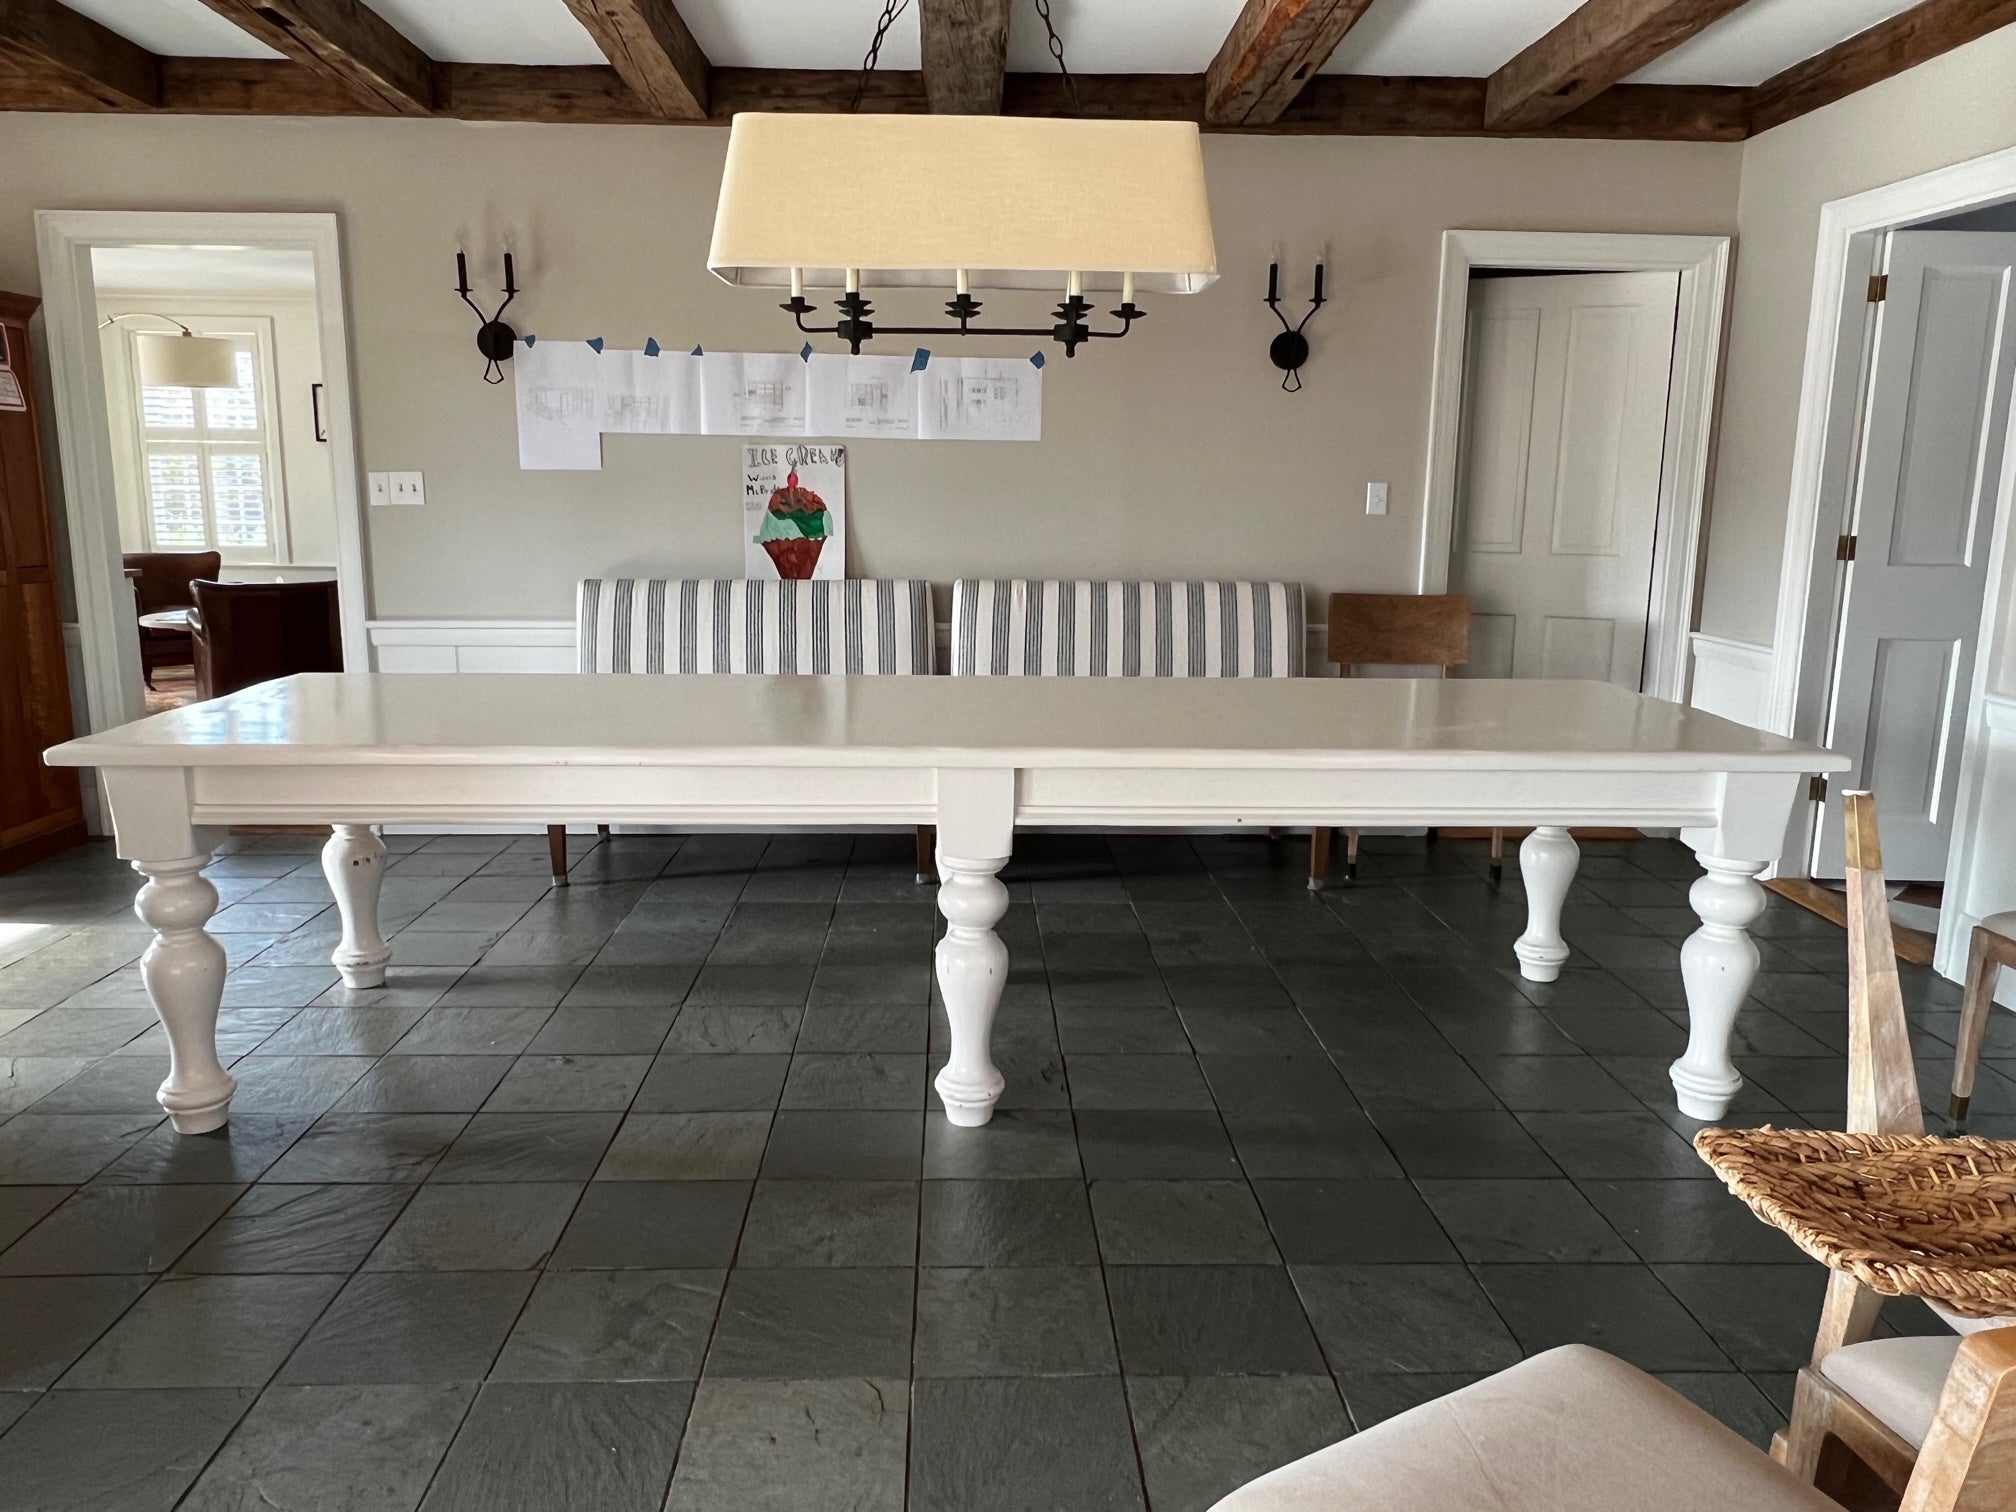 Monumental premium pine French country style harvest table by PJ Milligan, Santa Barbara, having a roomy 11 feet of length and lovely white painted finish. The thick plank top is supported by turned legs.   Its sturdy construction ensures long